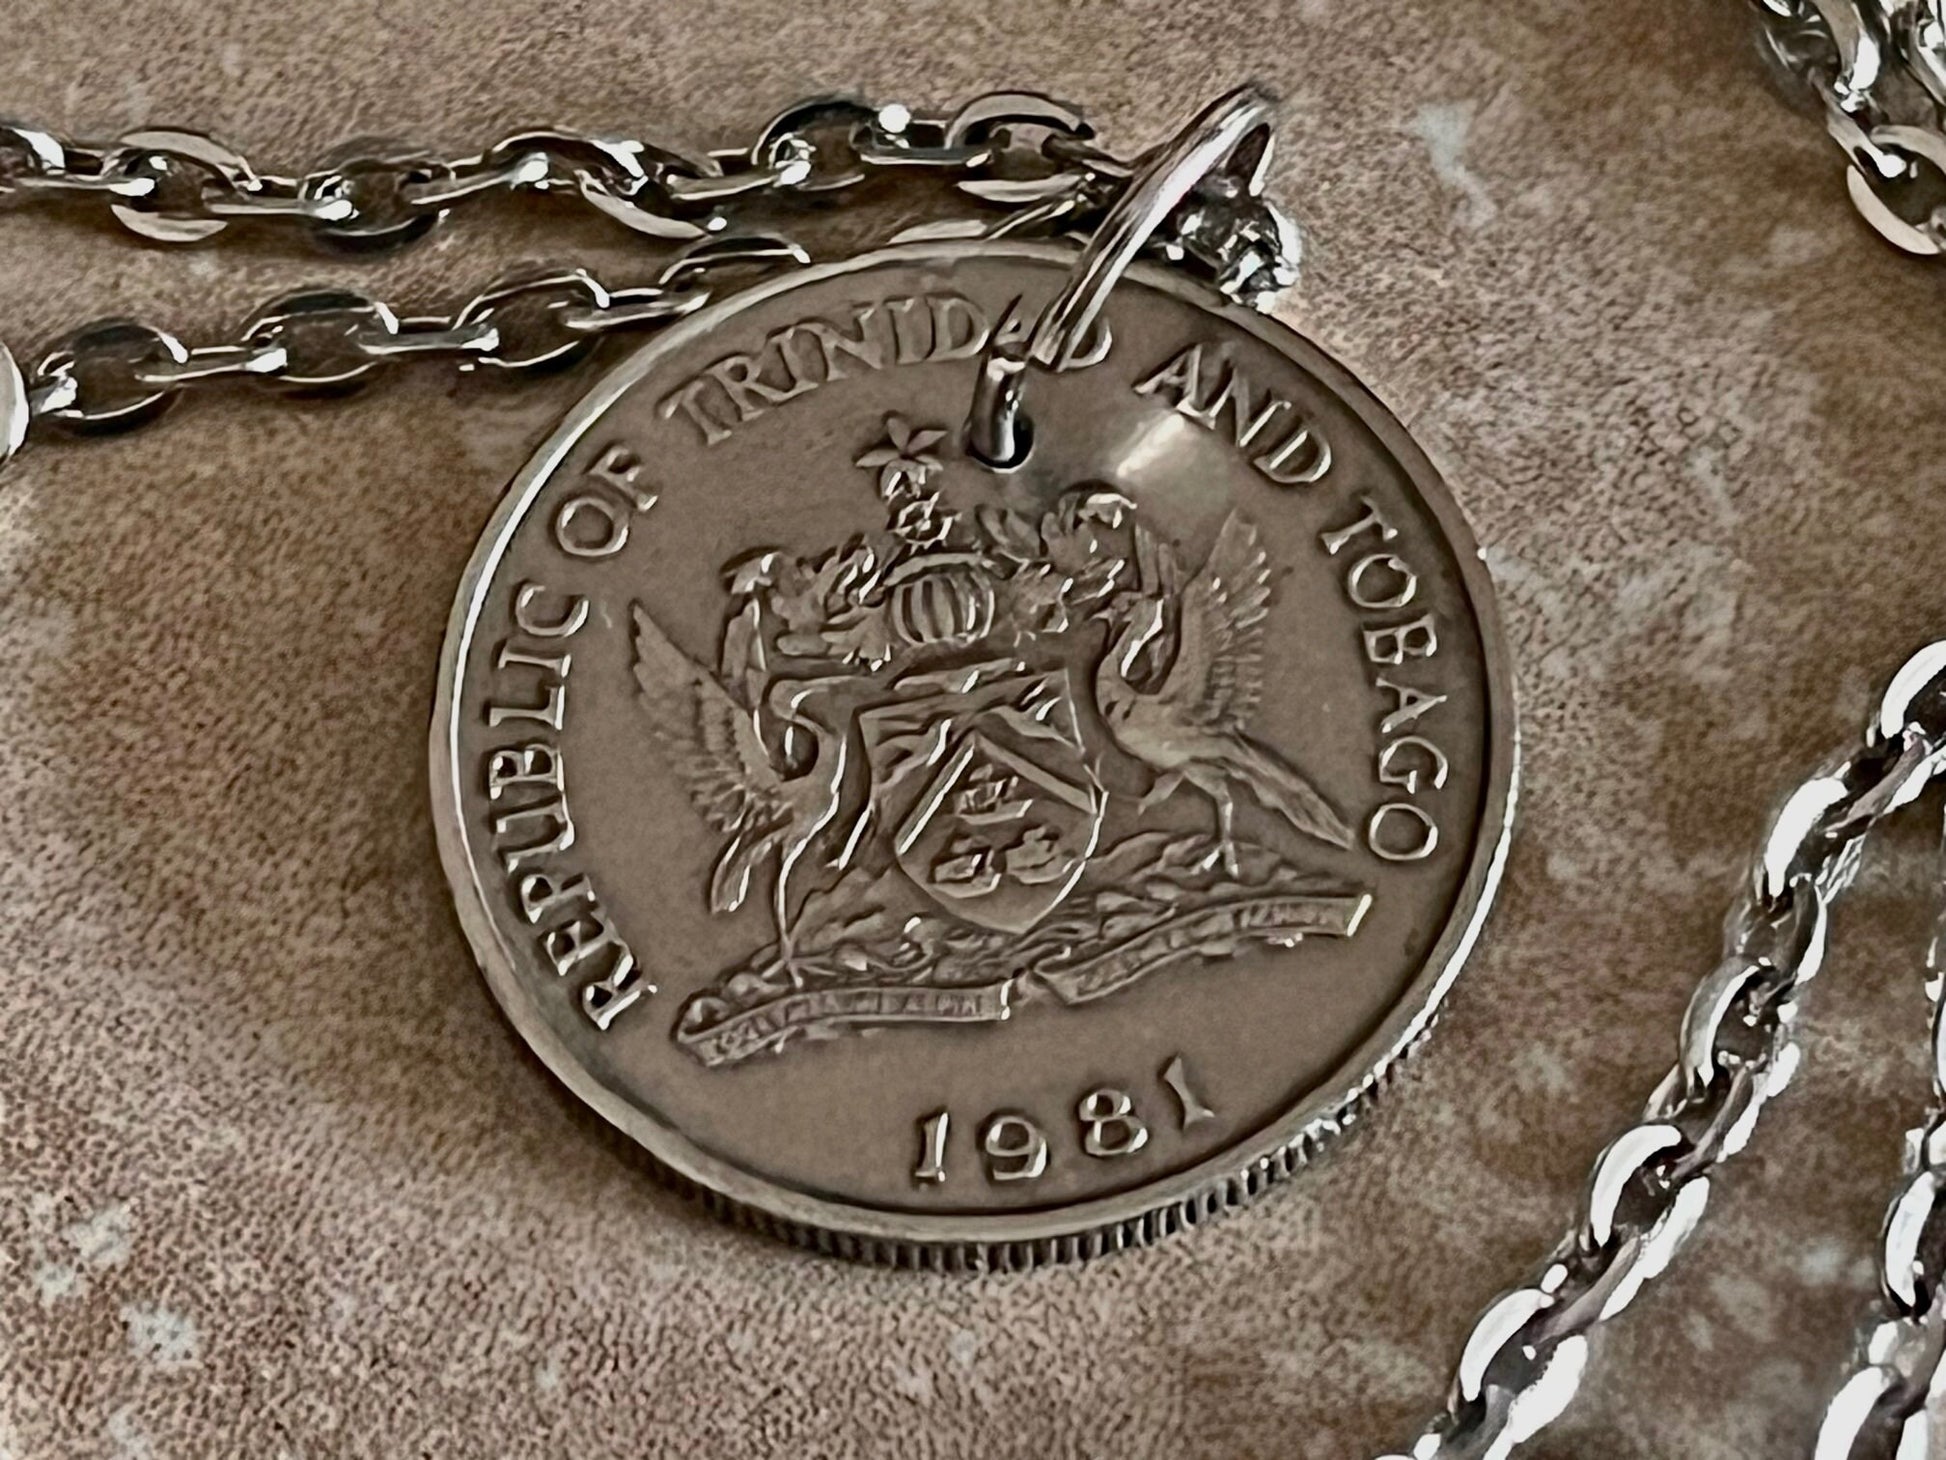 Trinidad and Tobago Coin Necklace 25 Cents Pendant Personal Vintage Handmade Jewelry Gift Friend Charm For Him Her World Coin Collector